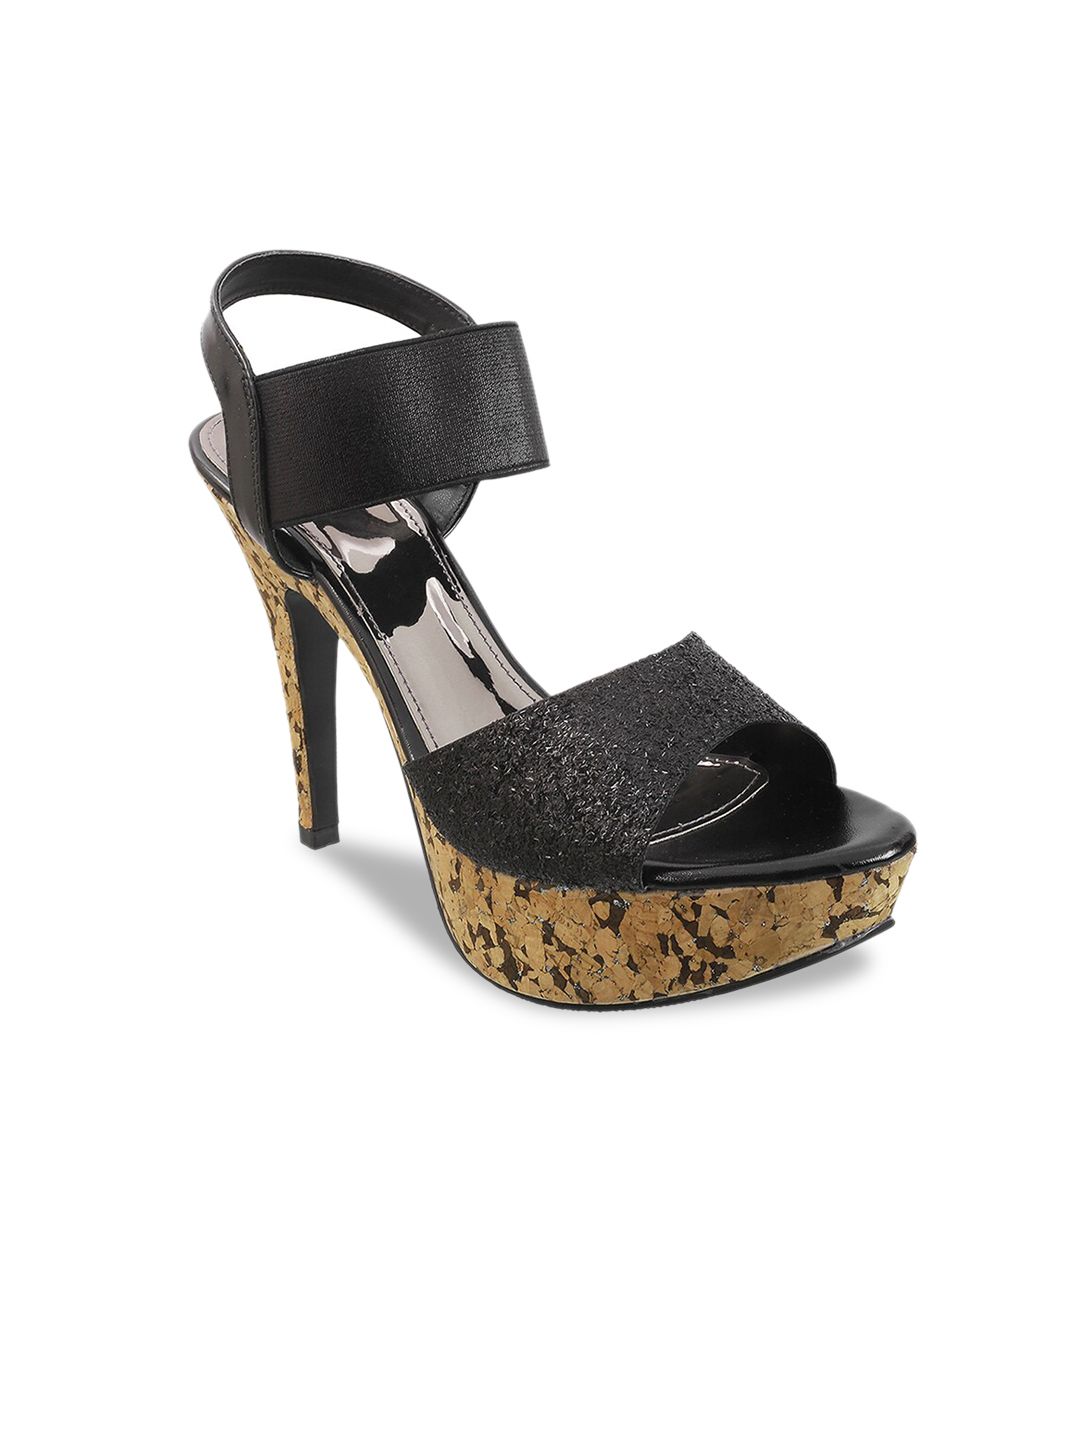 Mochi Black Printed Stiletto Sandals with Laser Cuts Price in India